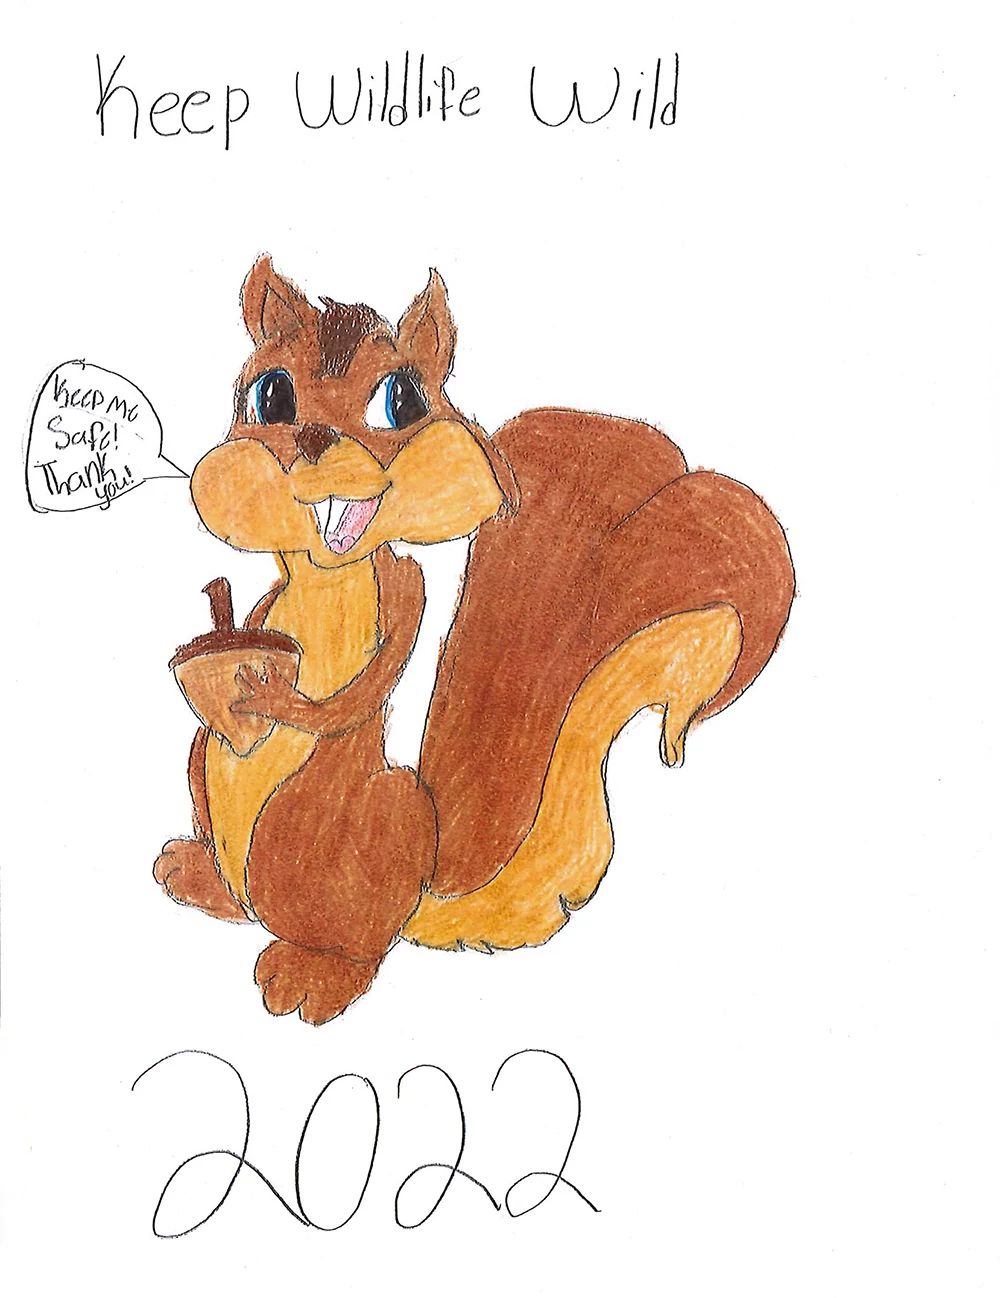 2022_KWW Poster Contest_6th grade_2nd place_Ariana Hartwig-Dickerson.jpeg